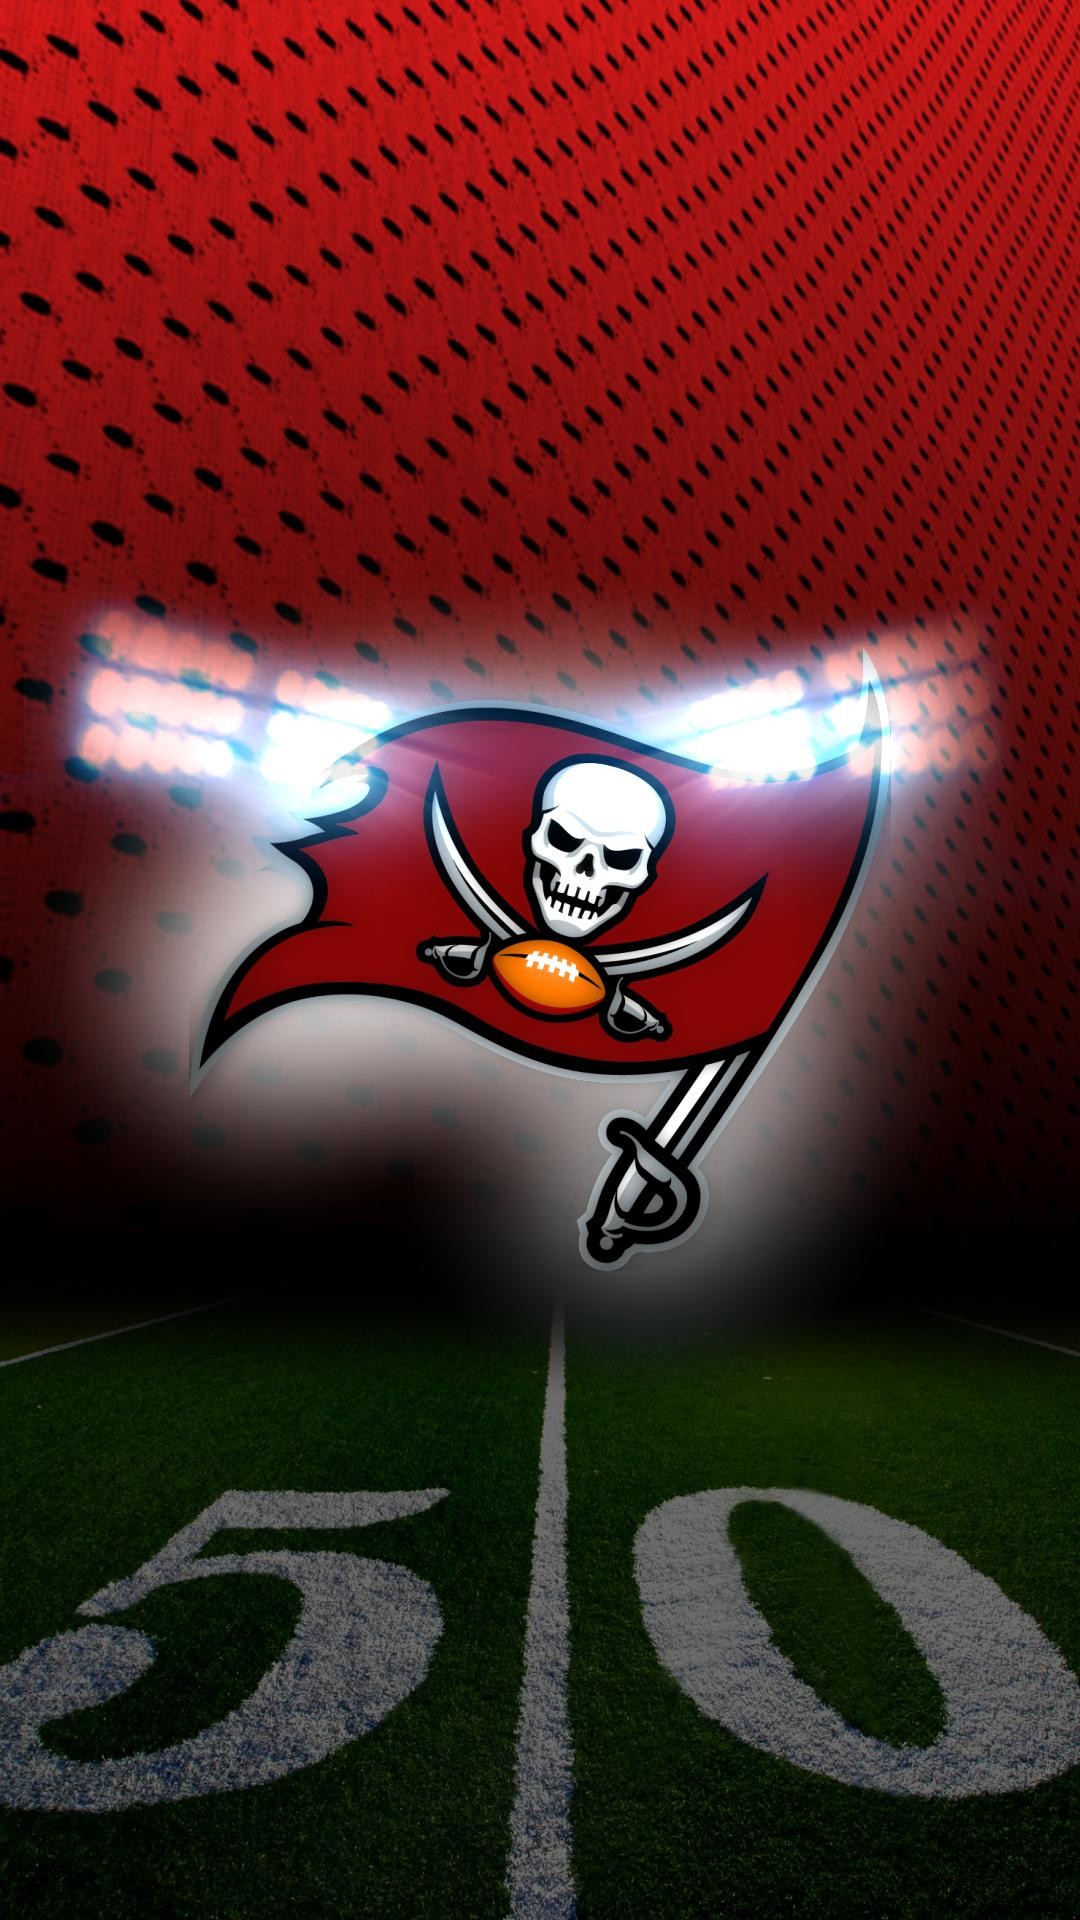 1080x1920 1920x1080 Tampa Bay Buccaneers Pc Iphone High Resolution Wallpaper Of  Computer ...">